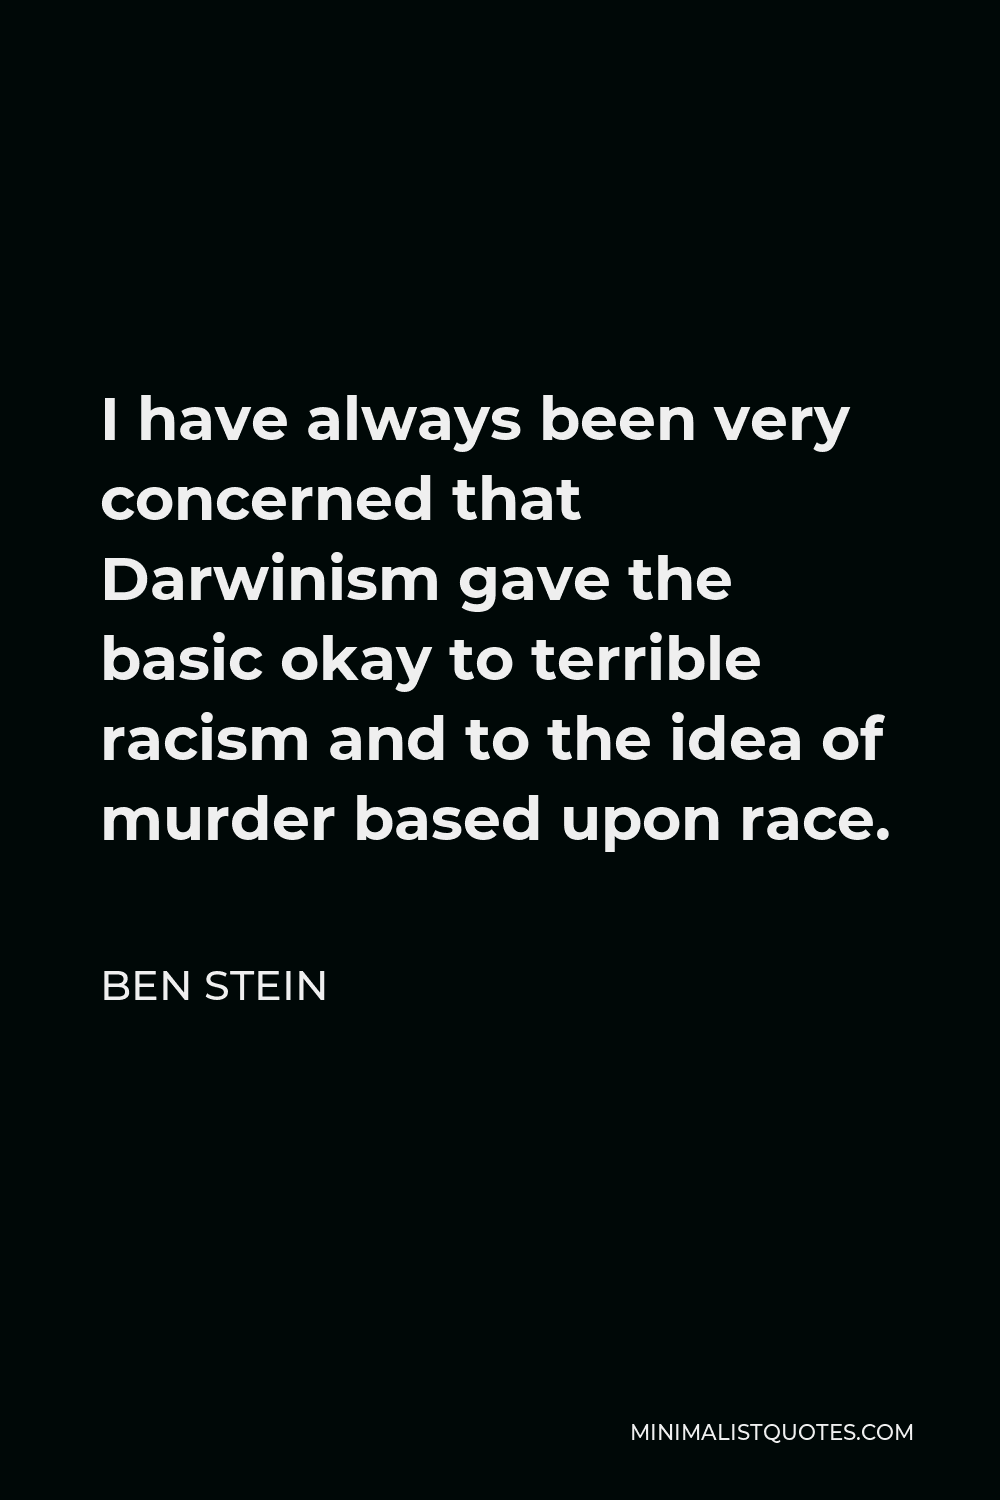 Ben Stein Quote - I have always been very concerned that Darwinism gave the basic okay to terrible racism and to the idea of murder based upon race.